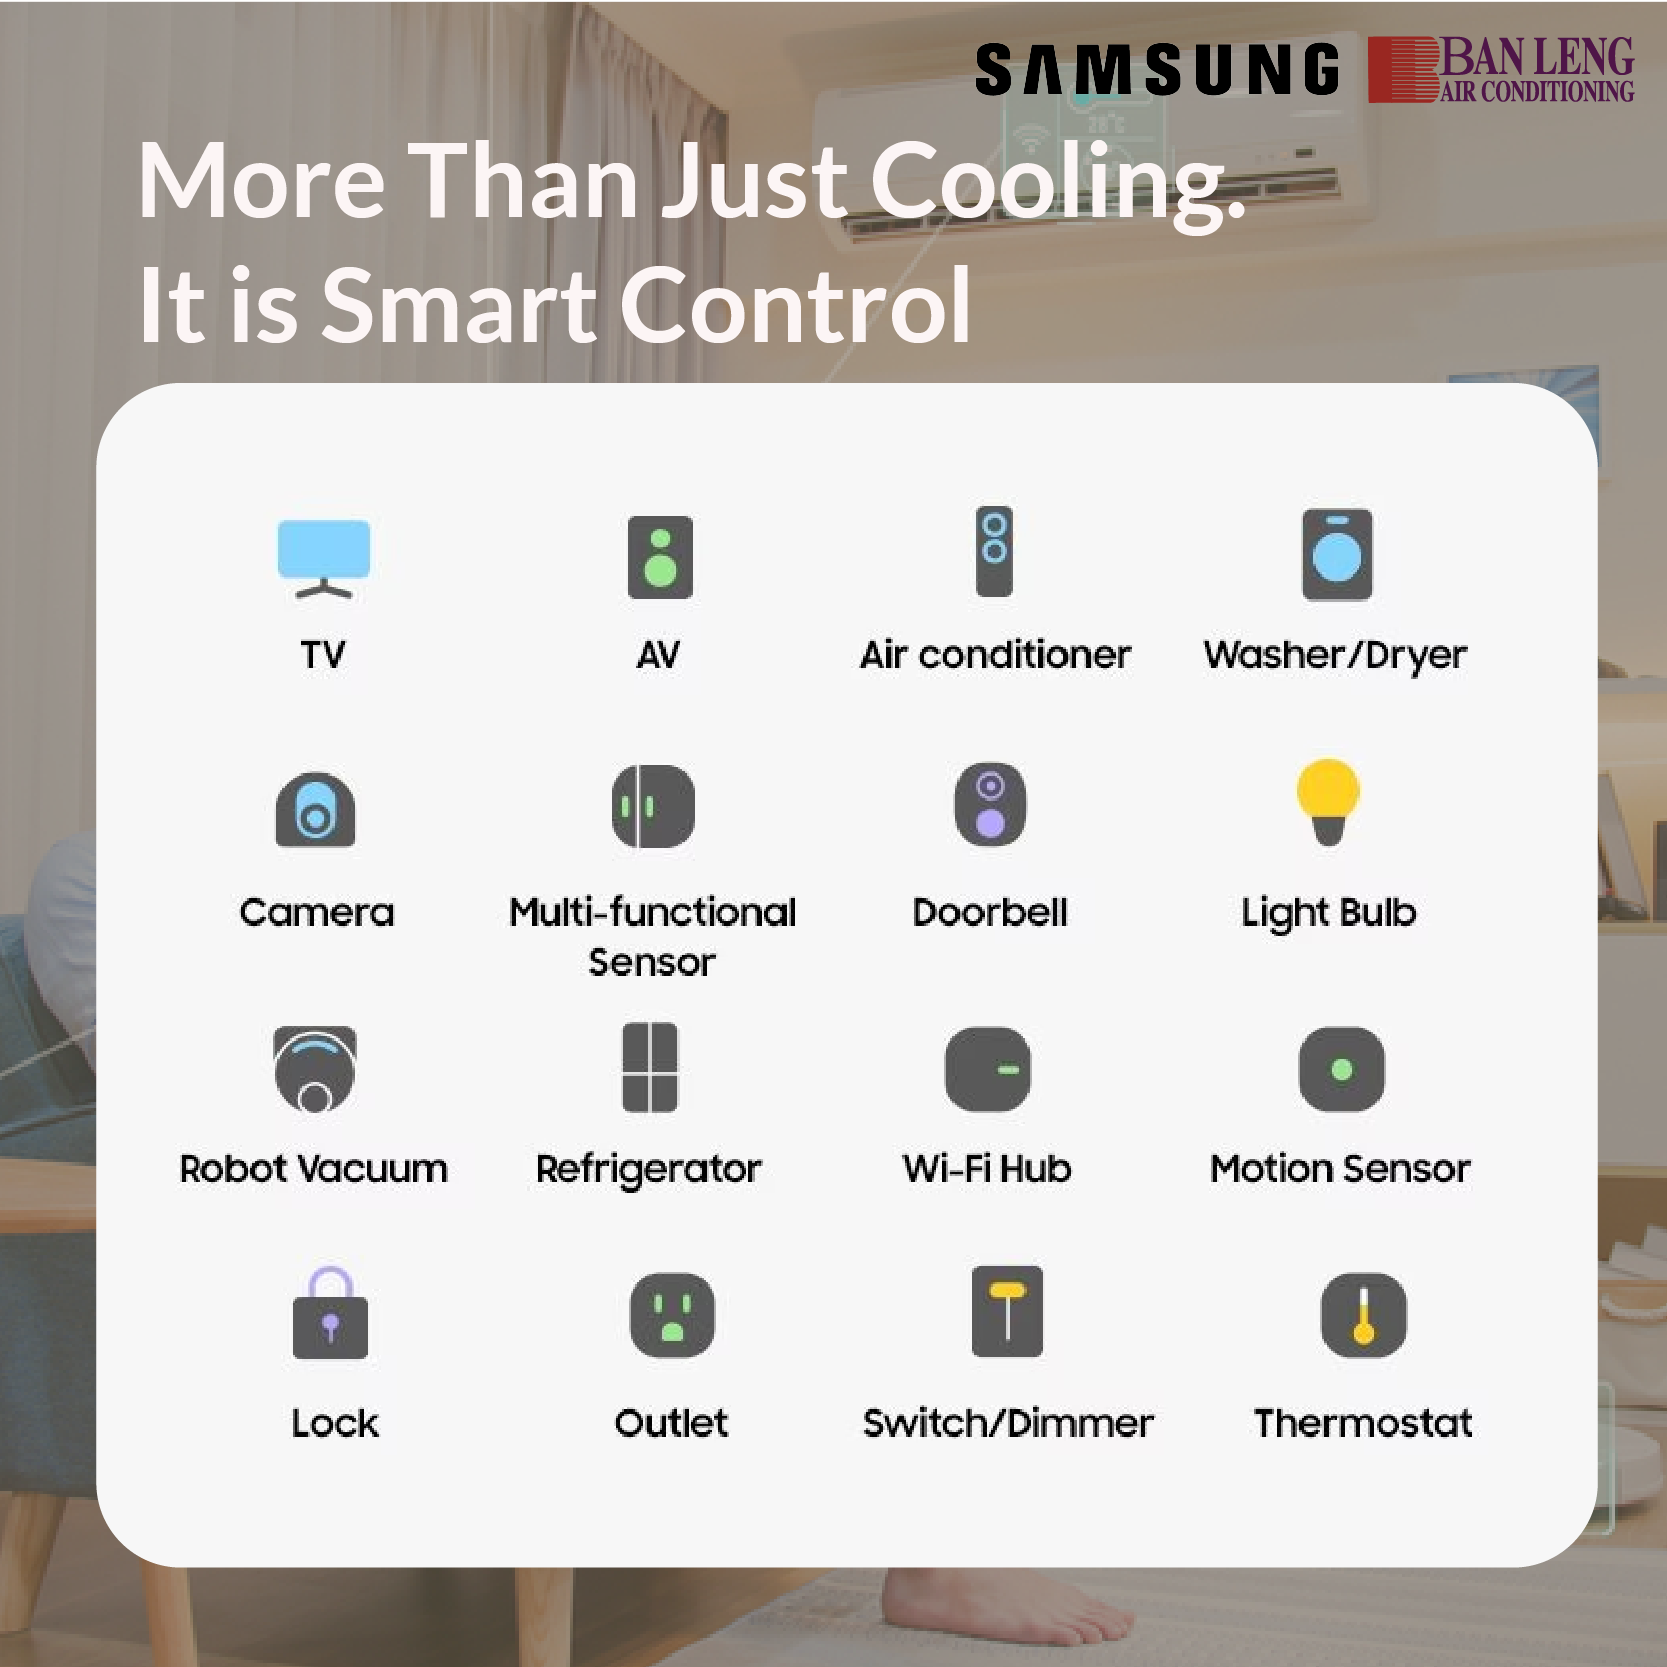 Upgrade Your Home with Samsung Smart Control Air Conditioner in Malaysia